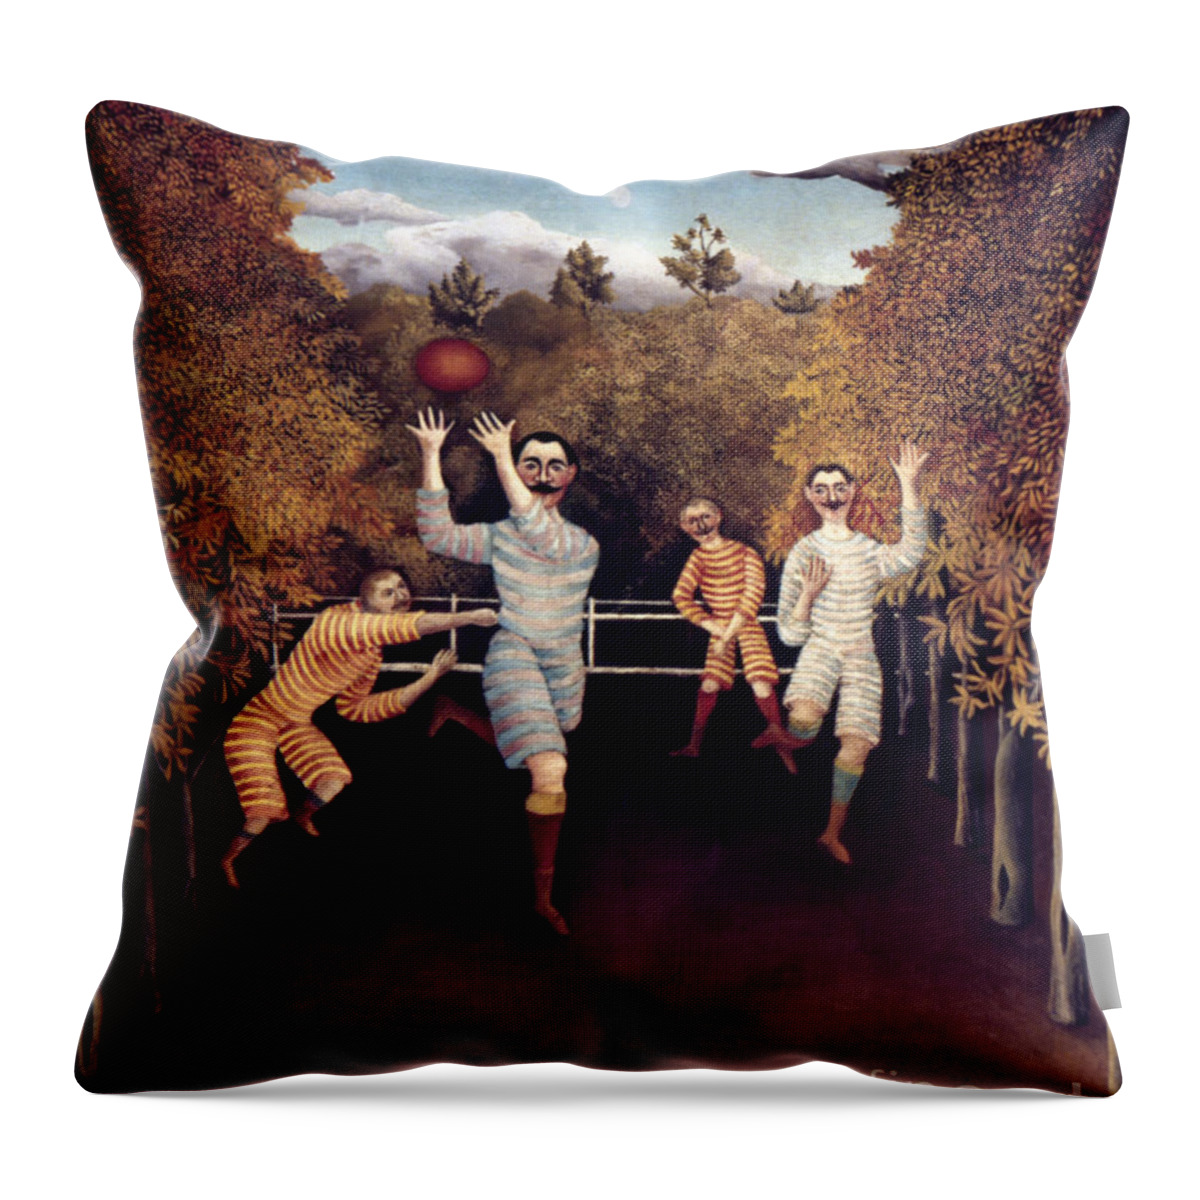 1908 Throw Pillow featuring the photograph Rousseau: Football, 1908 by Granger